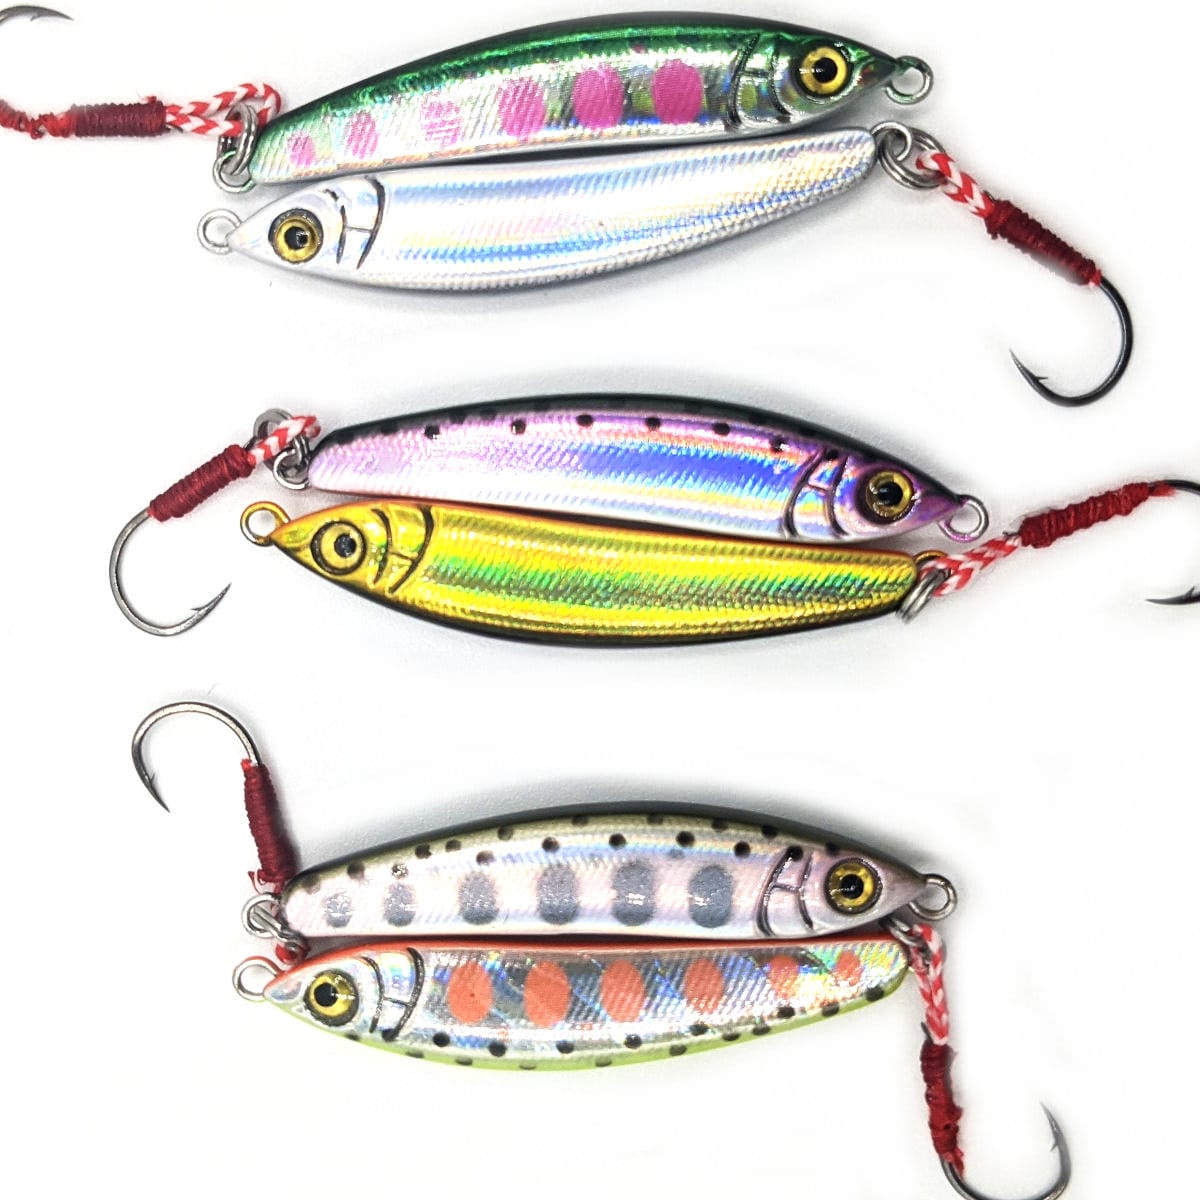 Bait Finesse Empire Shimmy Minnow - 3-Pack - Bait Finesse Empire